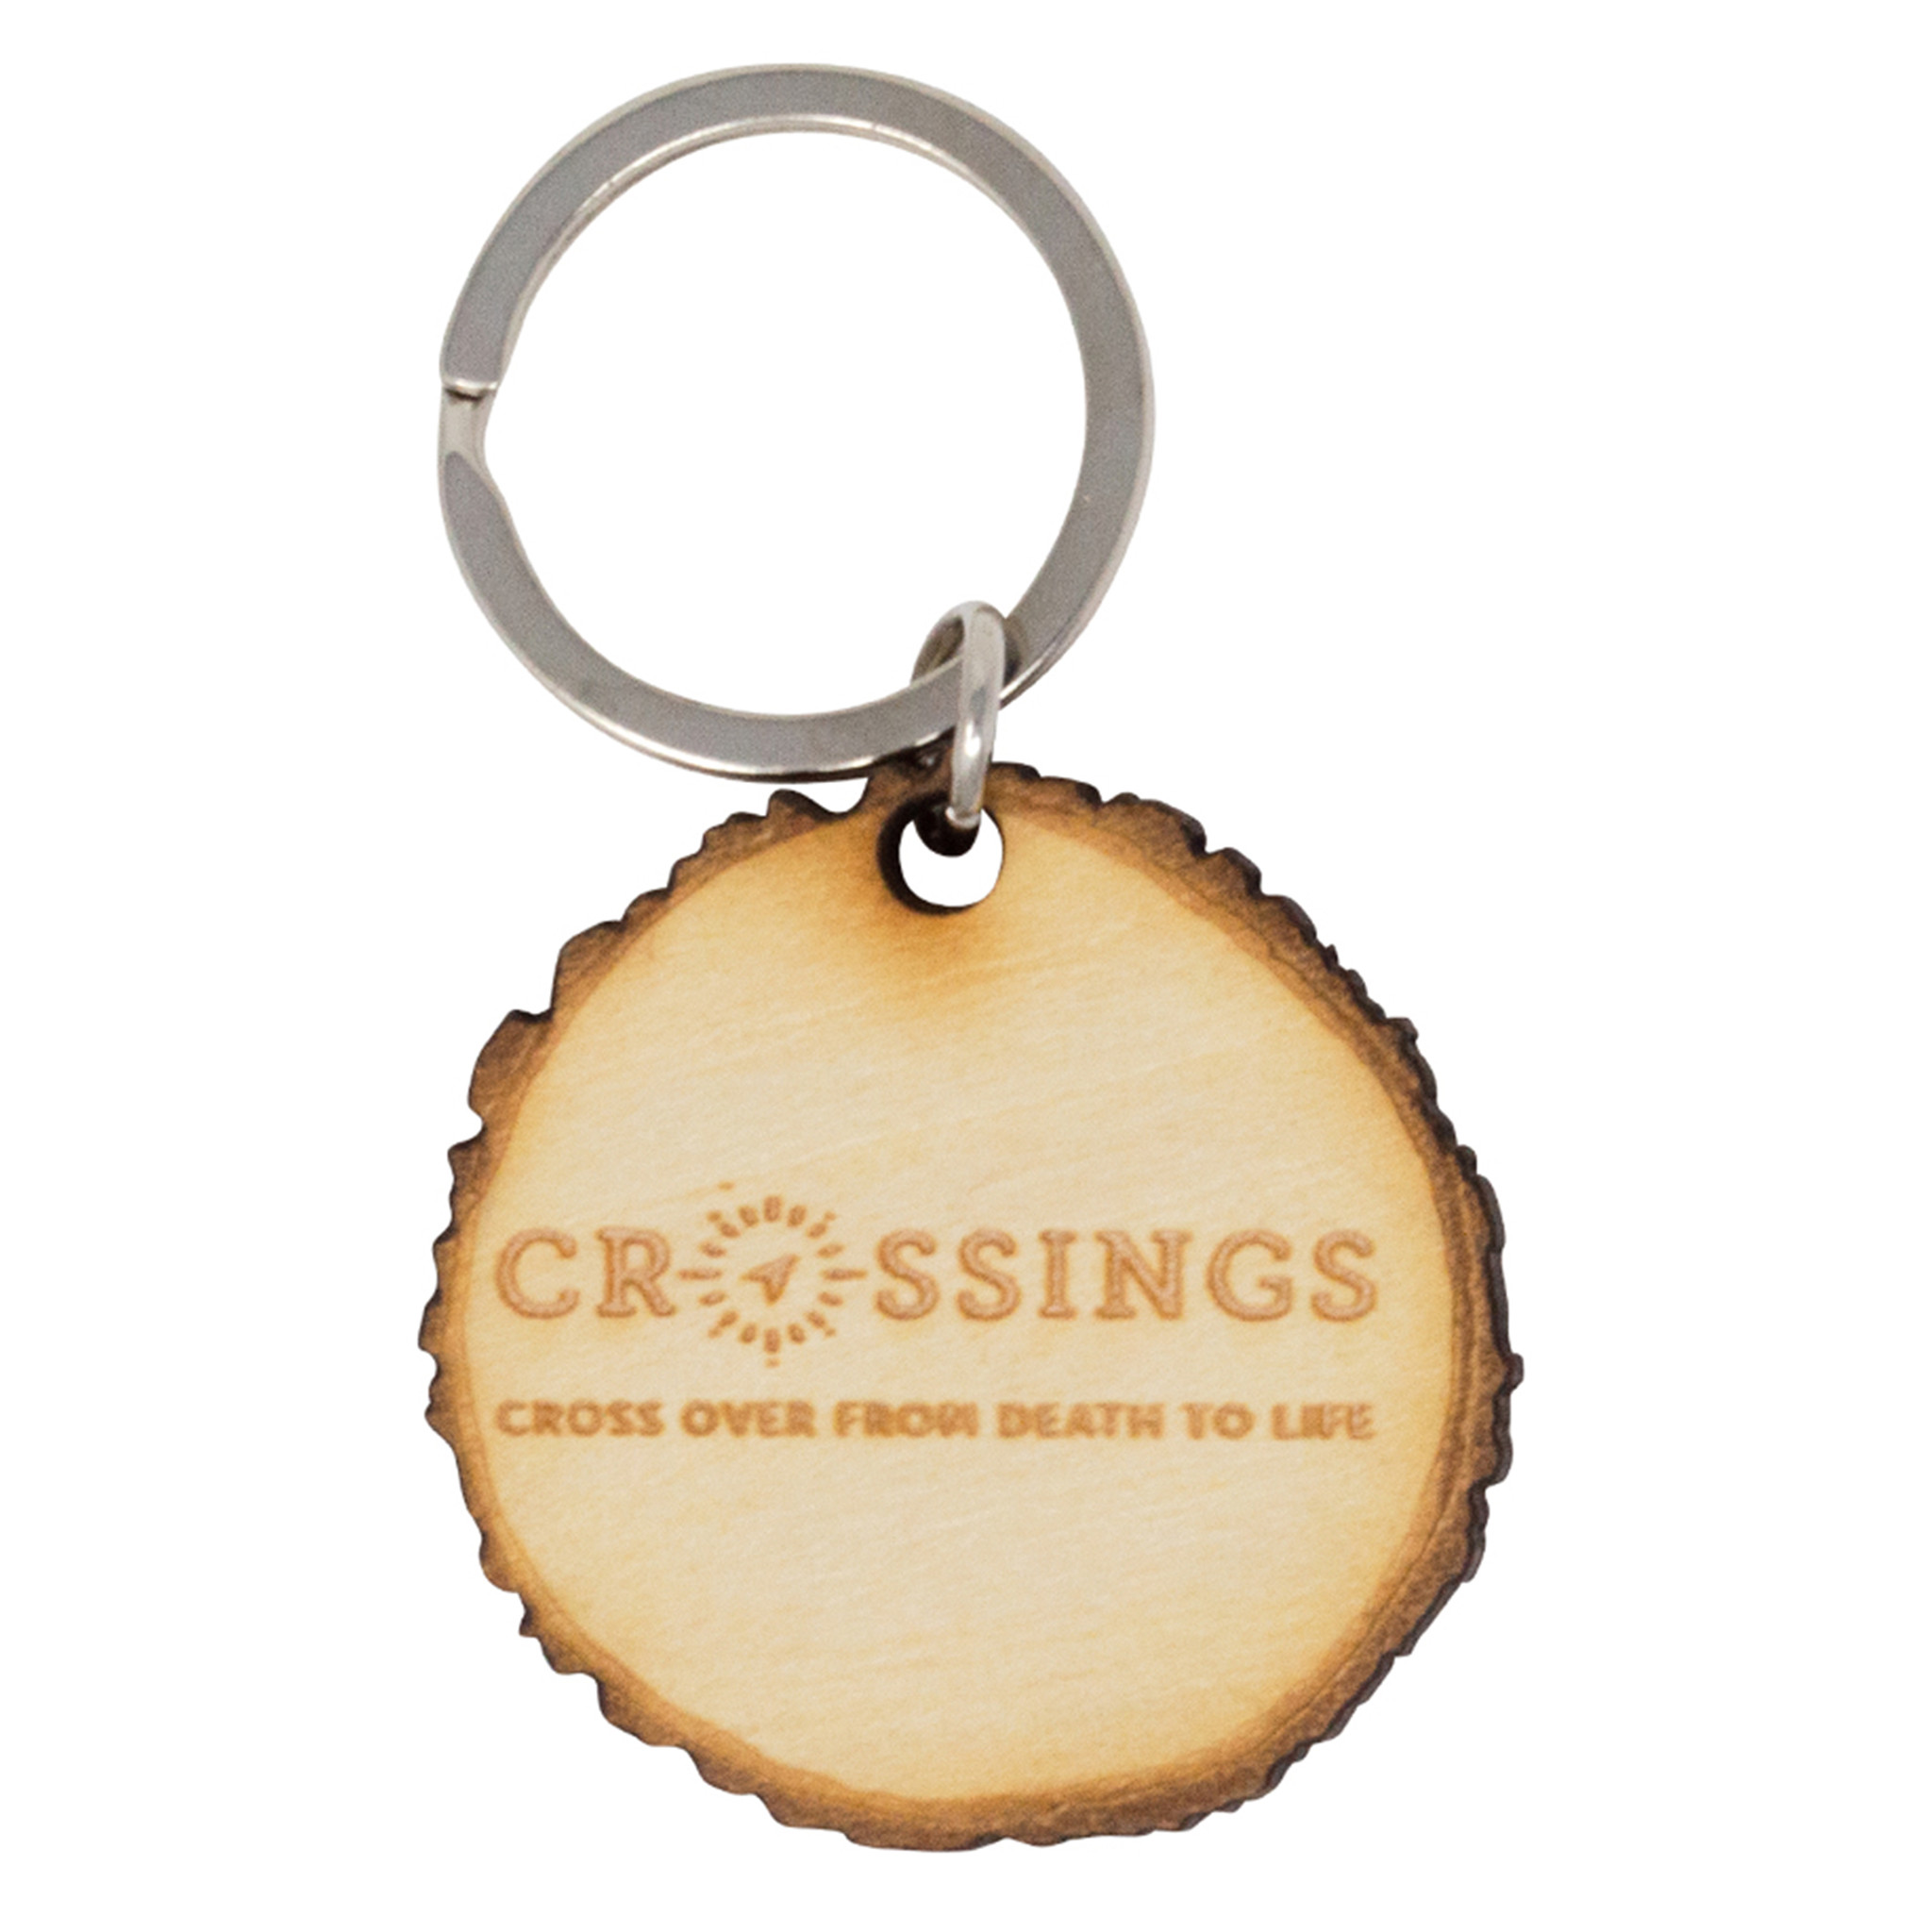 Laser engraving supplies, Pack of Keychains , wholesale supplies